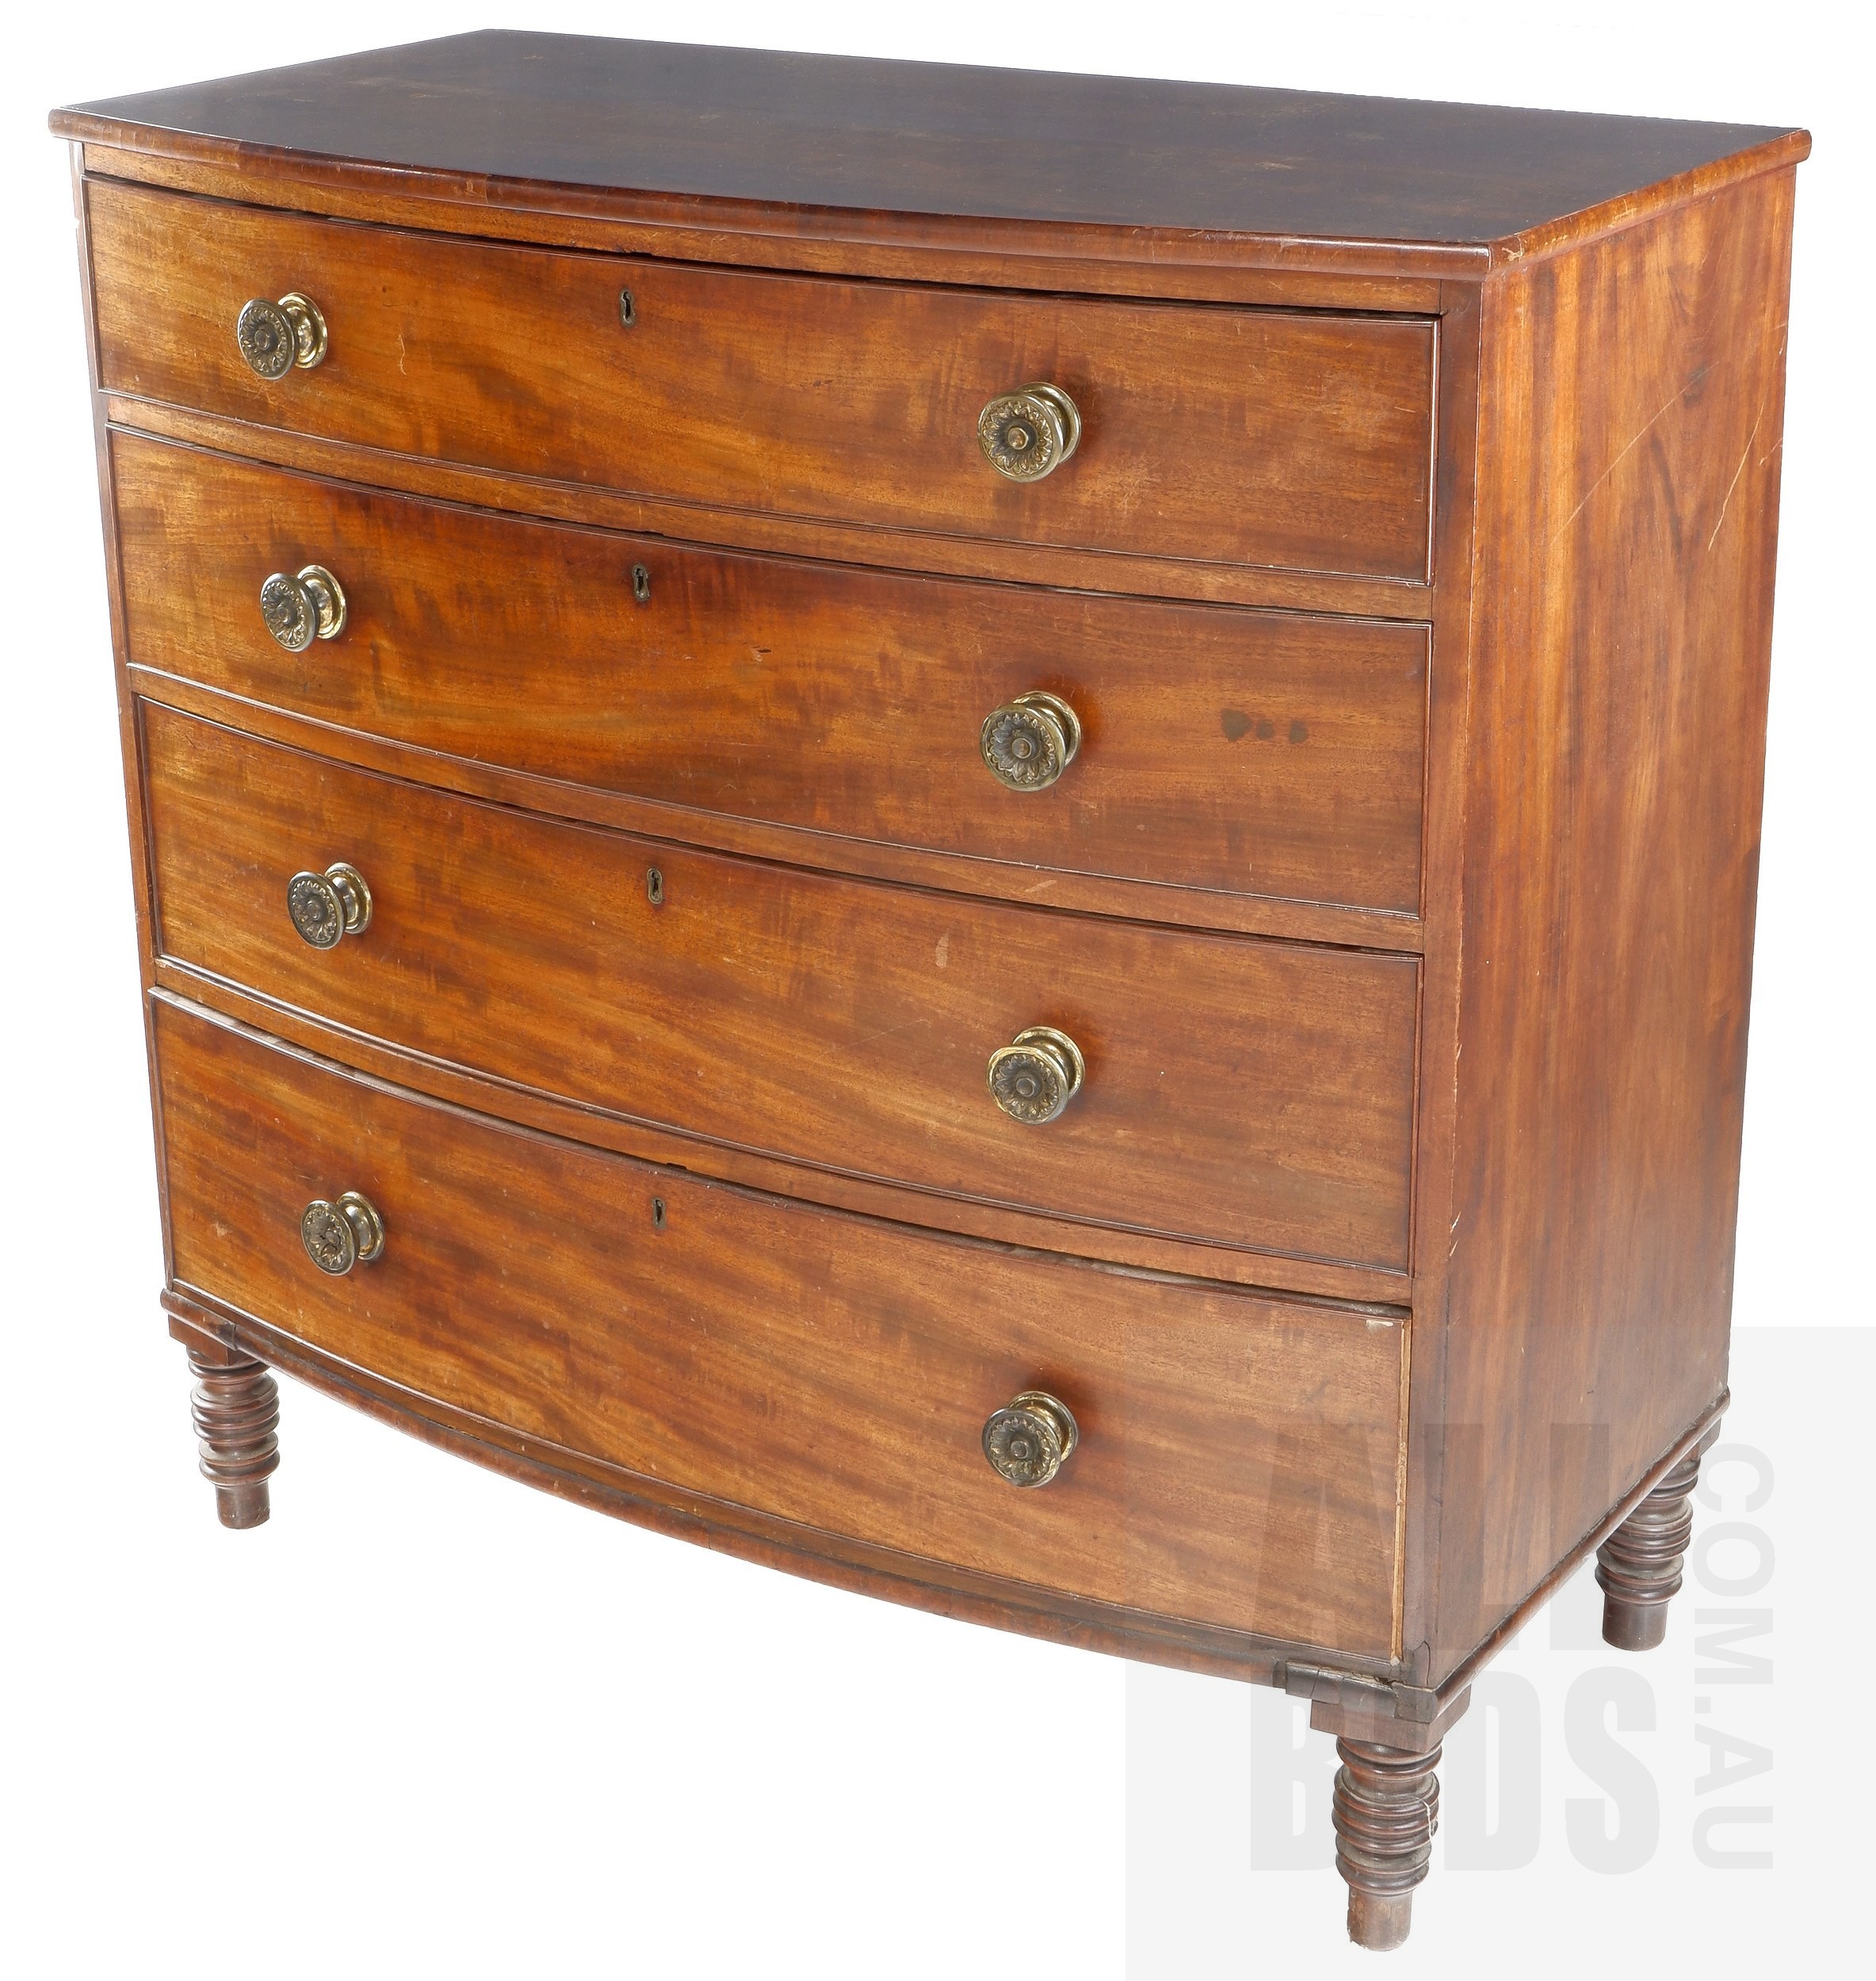 ' Regency Mahogany Bowfront Chest of Drawers, Circa 1810-20'